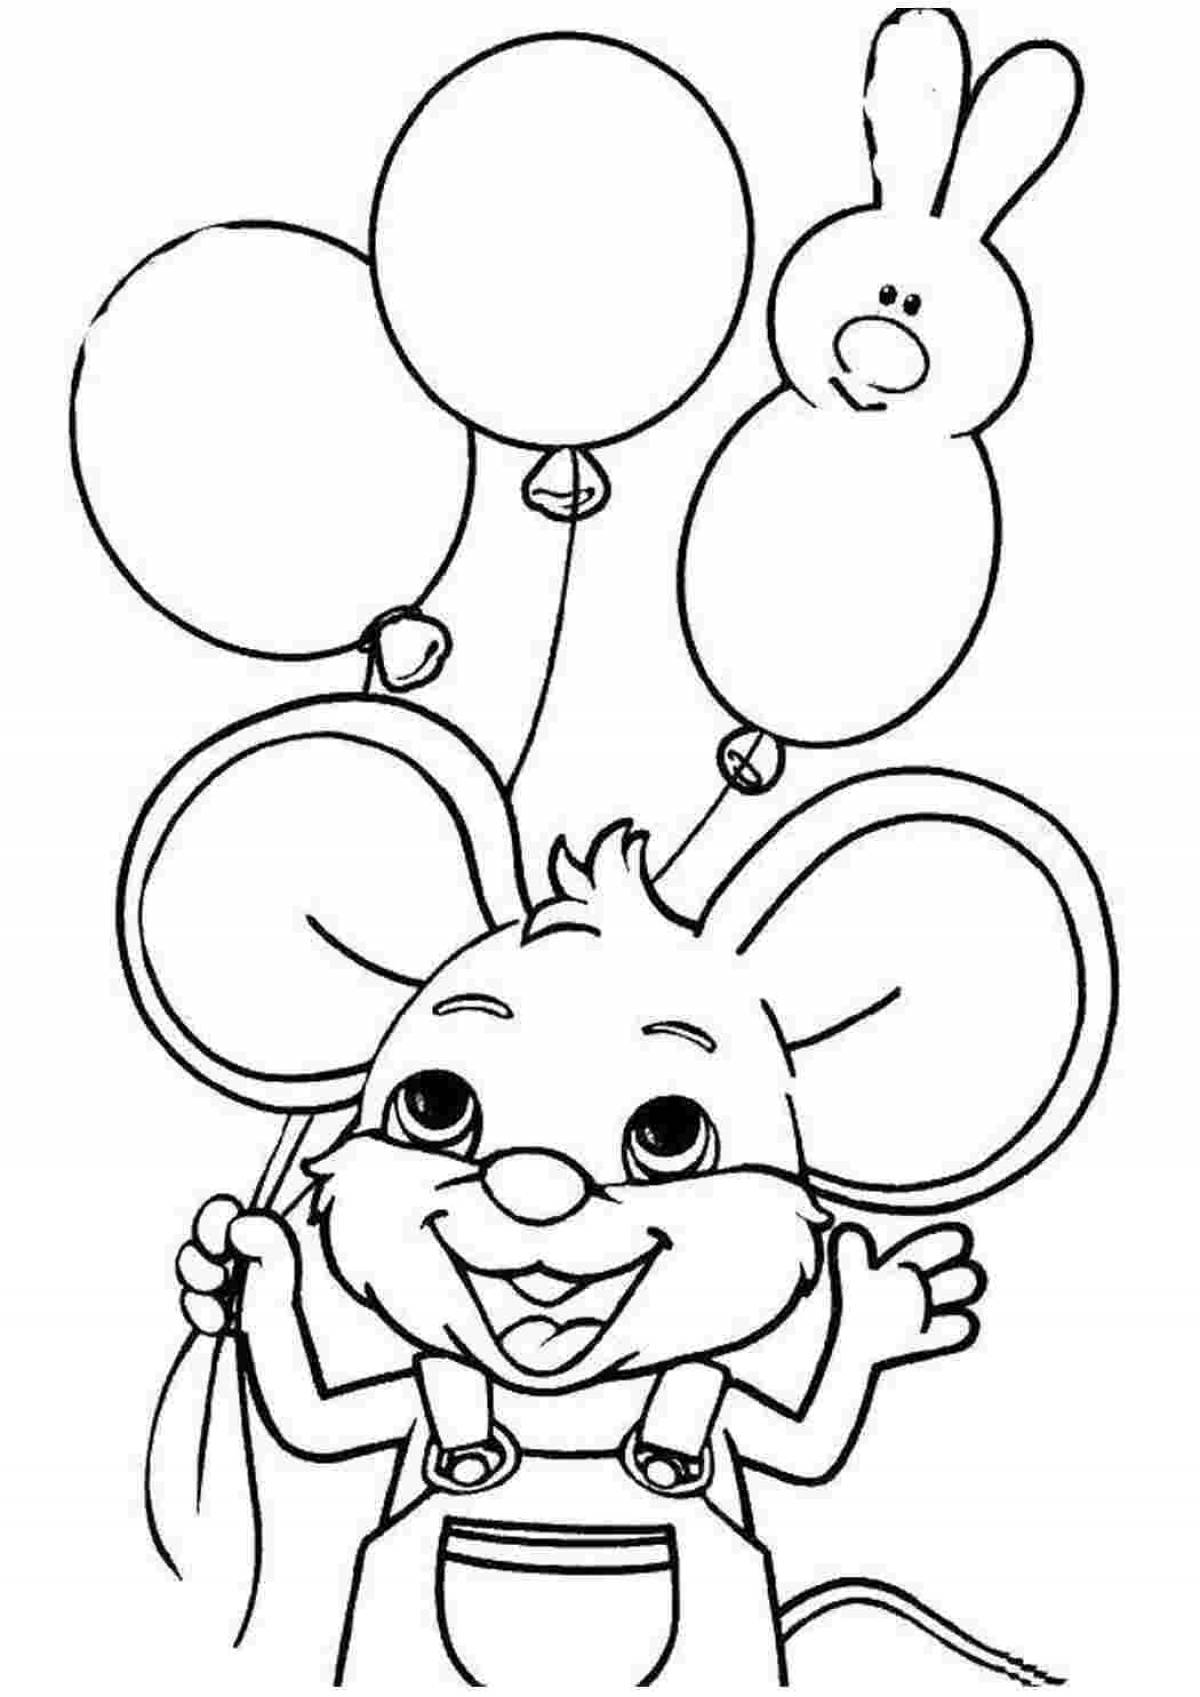 Bunny with balloons #2